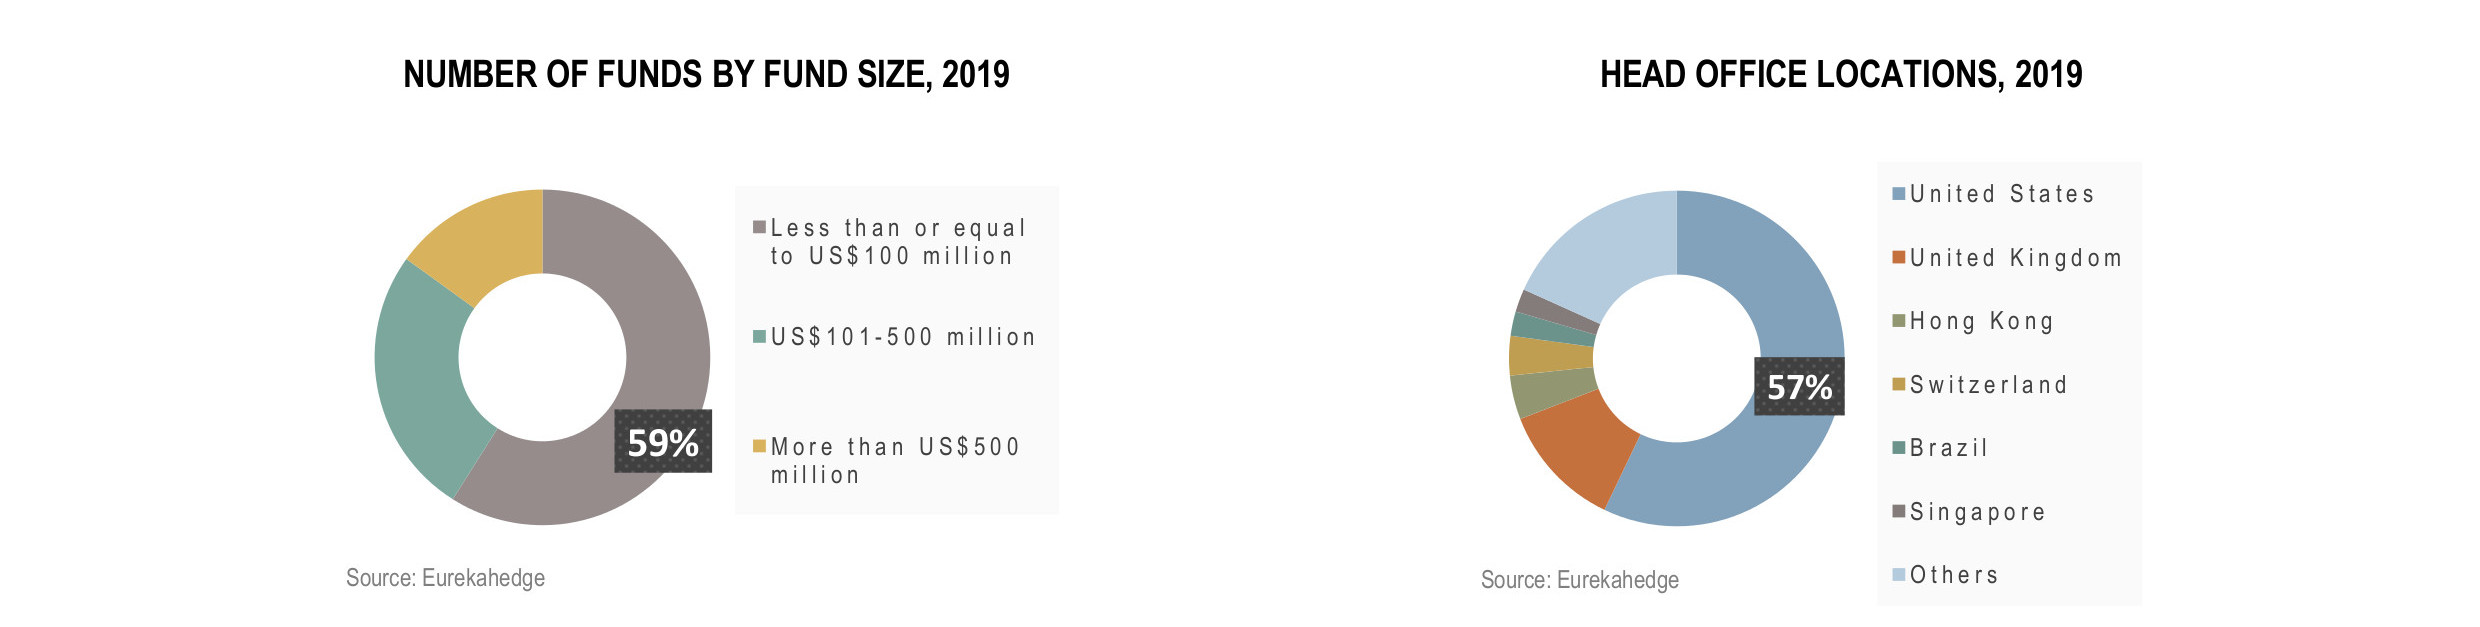 Global Hedge Funds Infographic August 2019 - funds by fund size and head office location